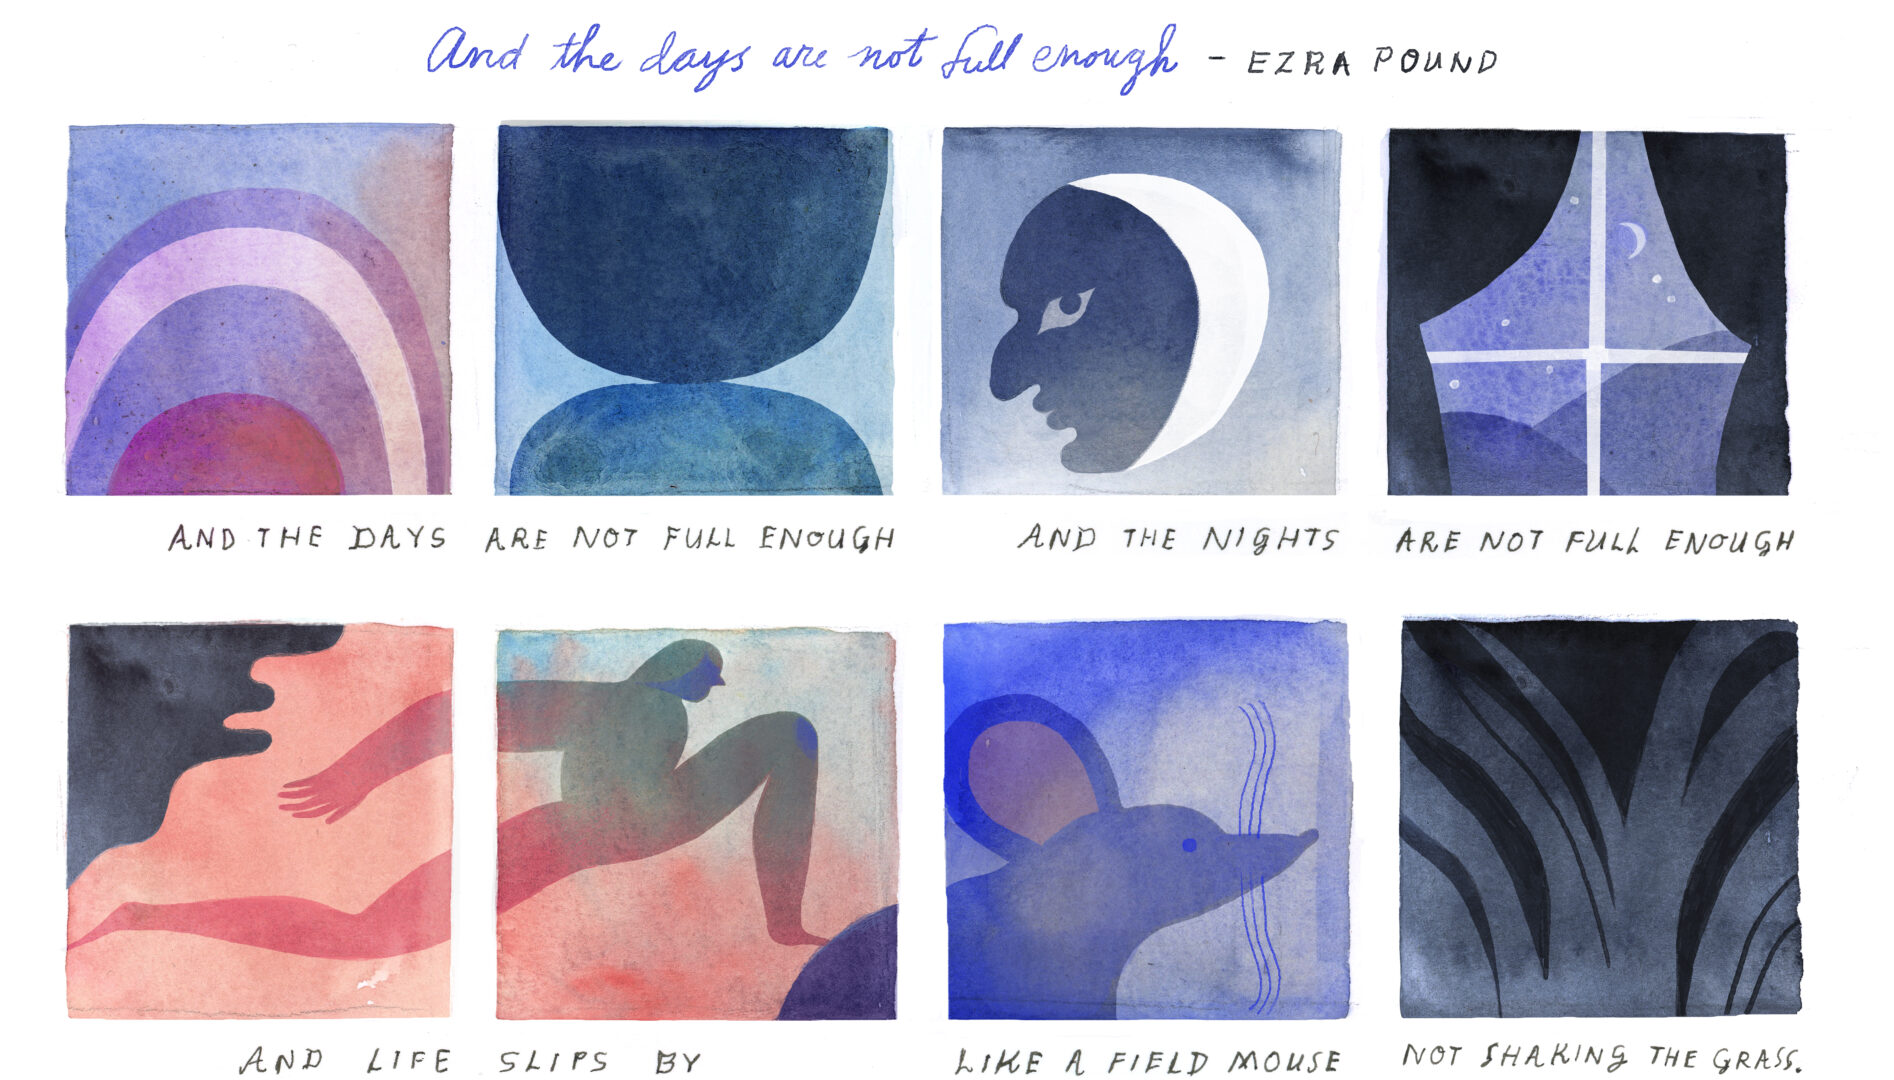 Illustrated poem by Ezra Pound: "And the days are not full enough"